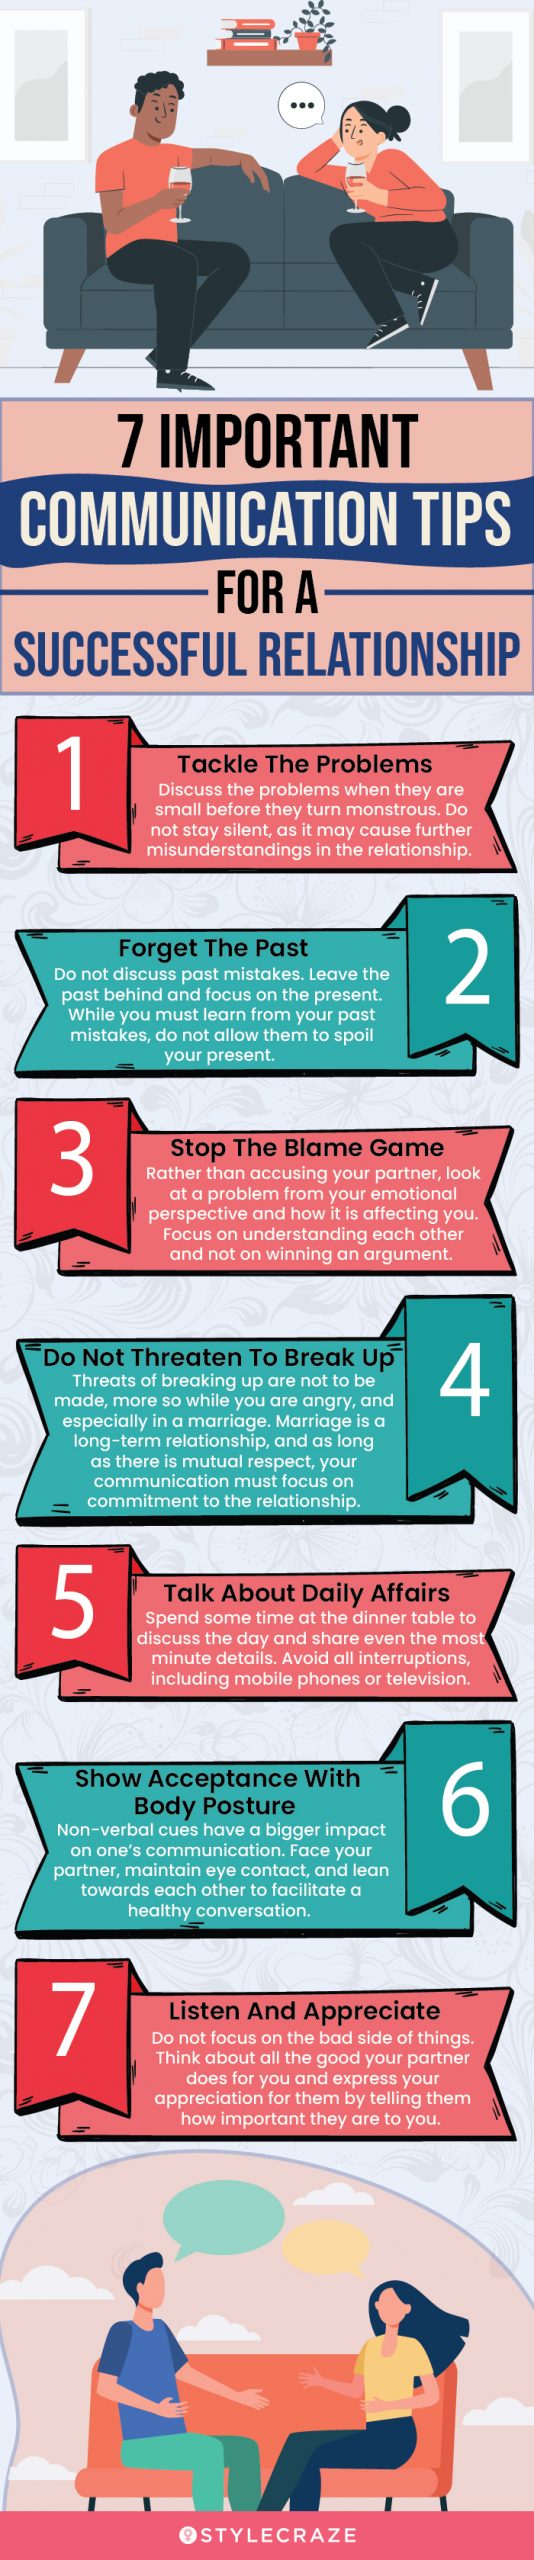 7 important communication tips for a successful relationship (infographic)